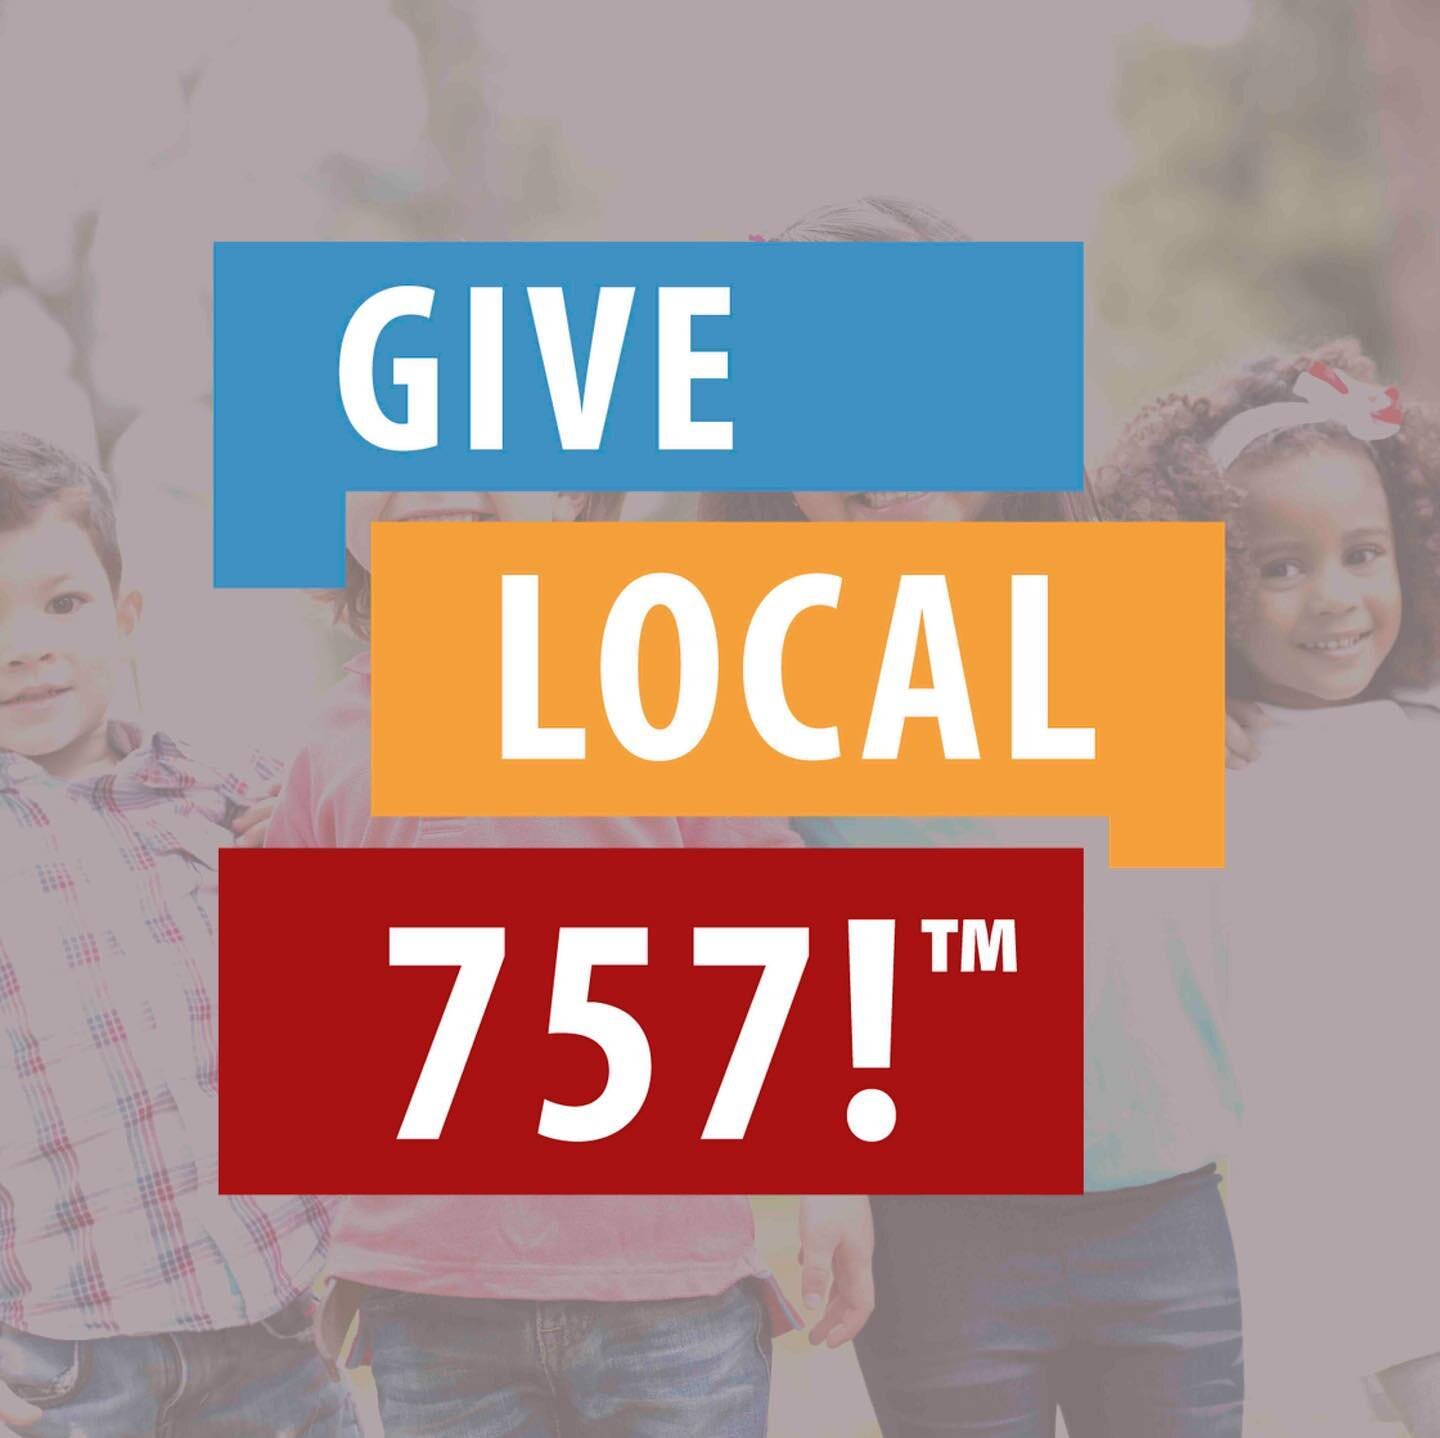 Today is the day! Give Local 757, an online 24-hour fundraising event that the Center for Child &amp; Family Services is humbled to be a part of.

It ends tonight! To donate, visit www.givelocal757.org or clink the link in our bio to go to the Center